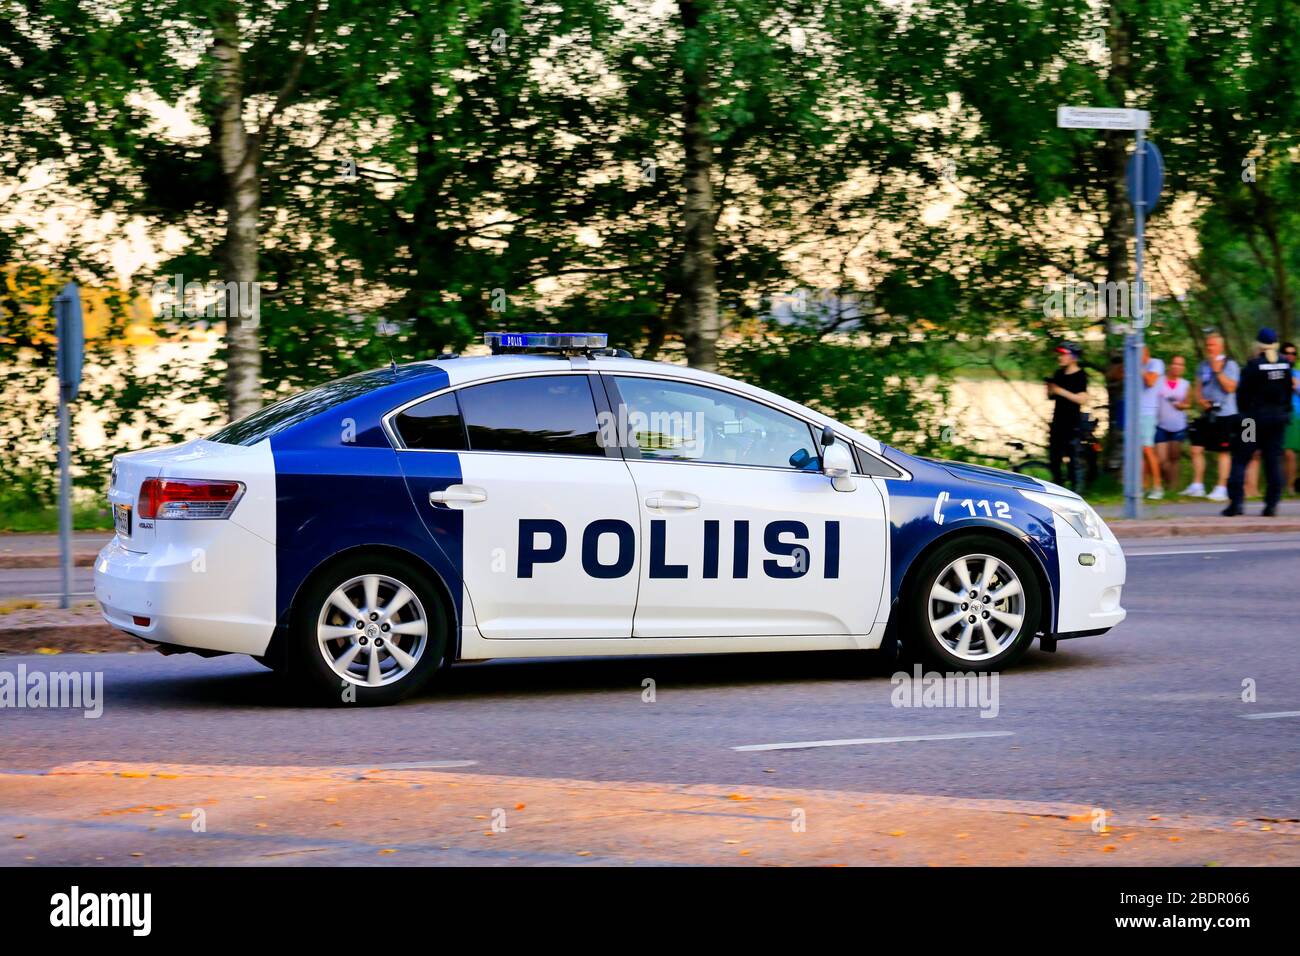 Helsinki, Finland. July 15, 2018. Toyota Police vehicle in Helsinki for the US and Russian Presidents' historic Helsinki2018 meeting. Stock Photo